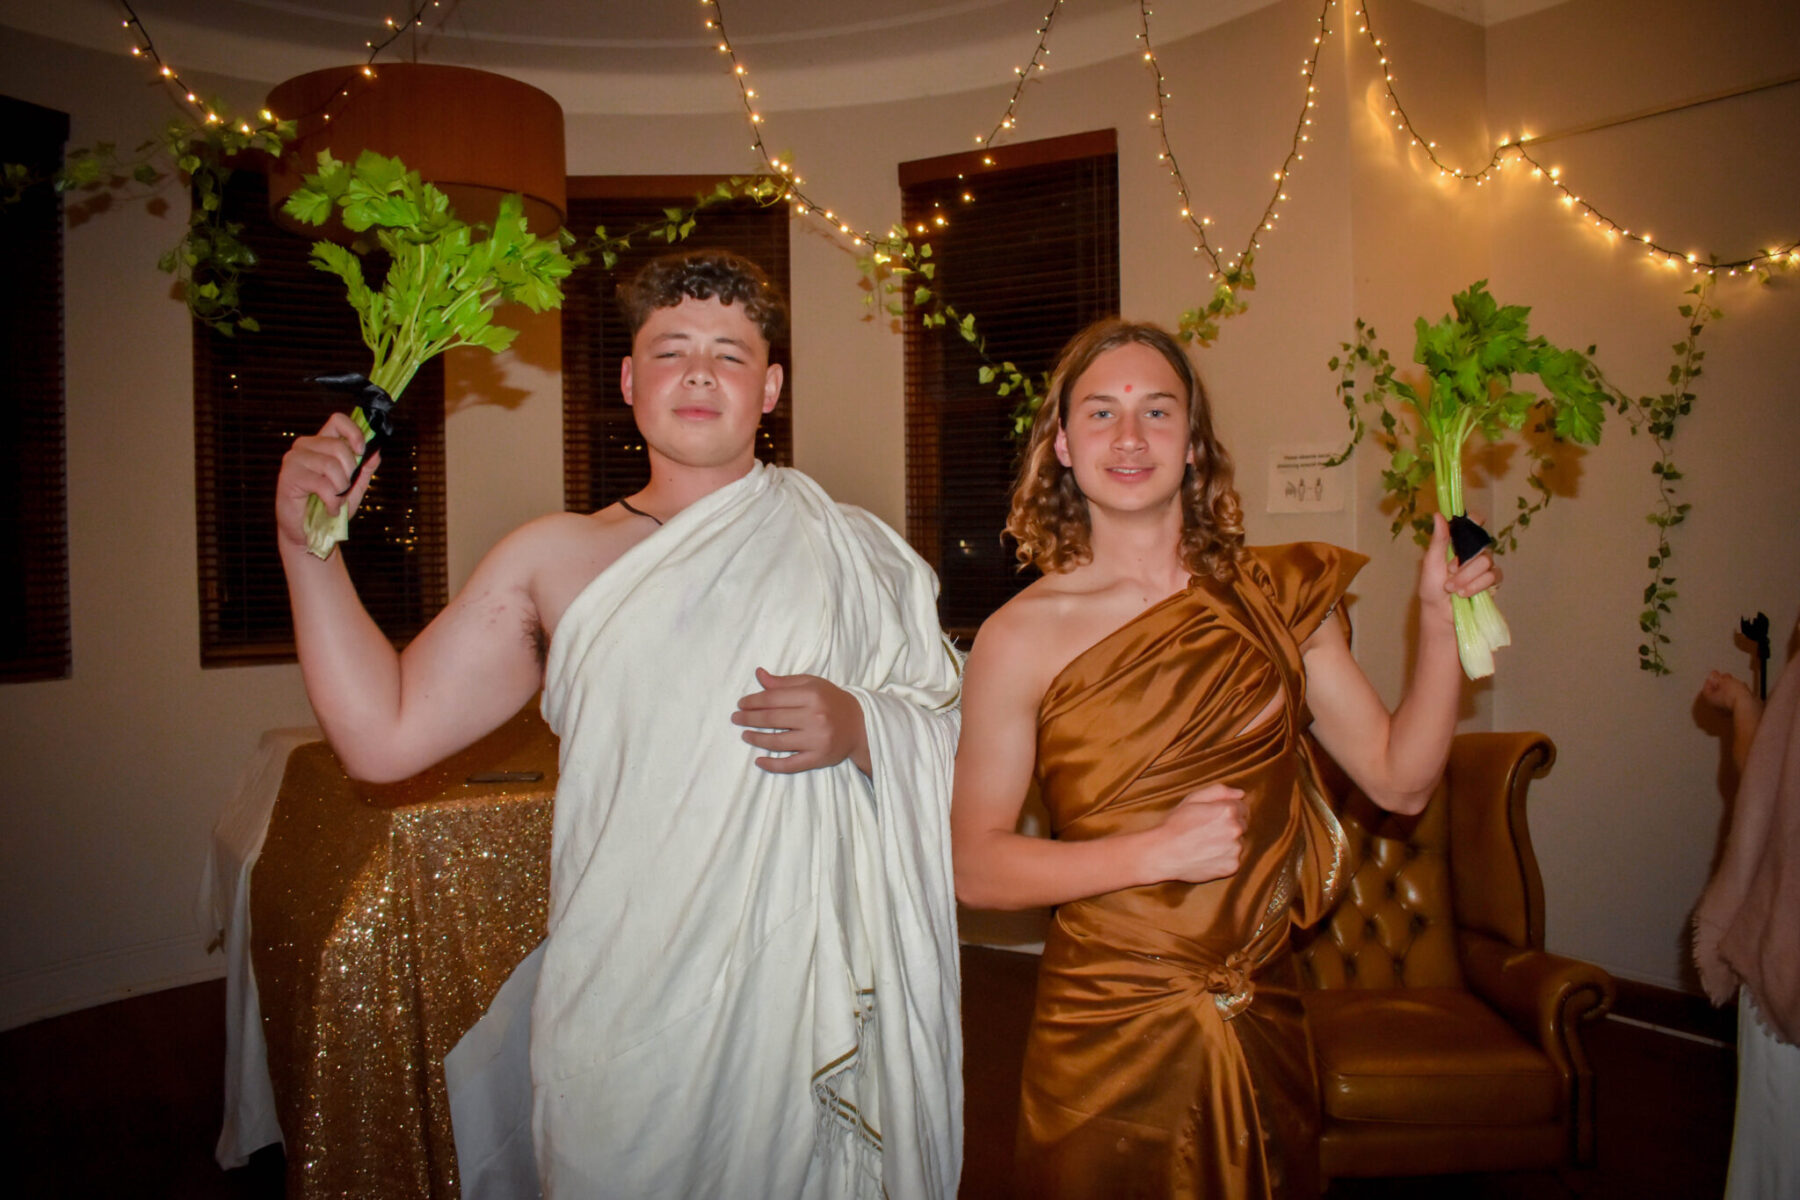 Classics-Week-Toga-Party-2021-Edited-22-scaled-1. Campion College Australia.